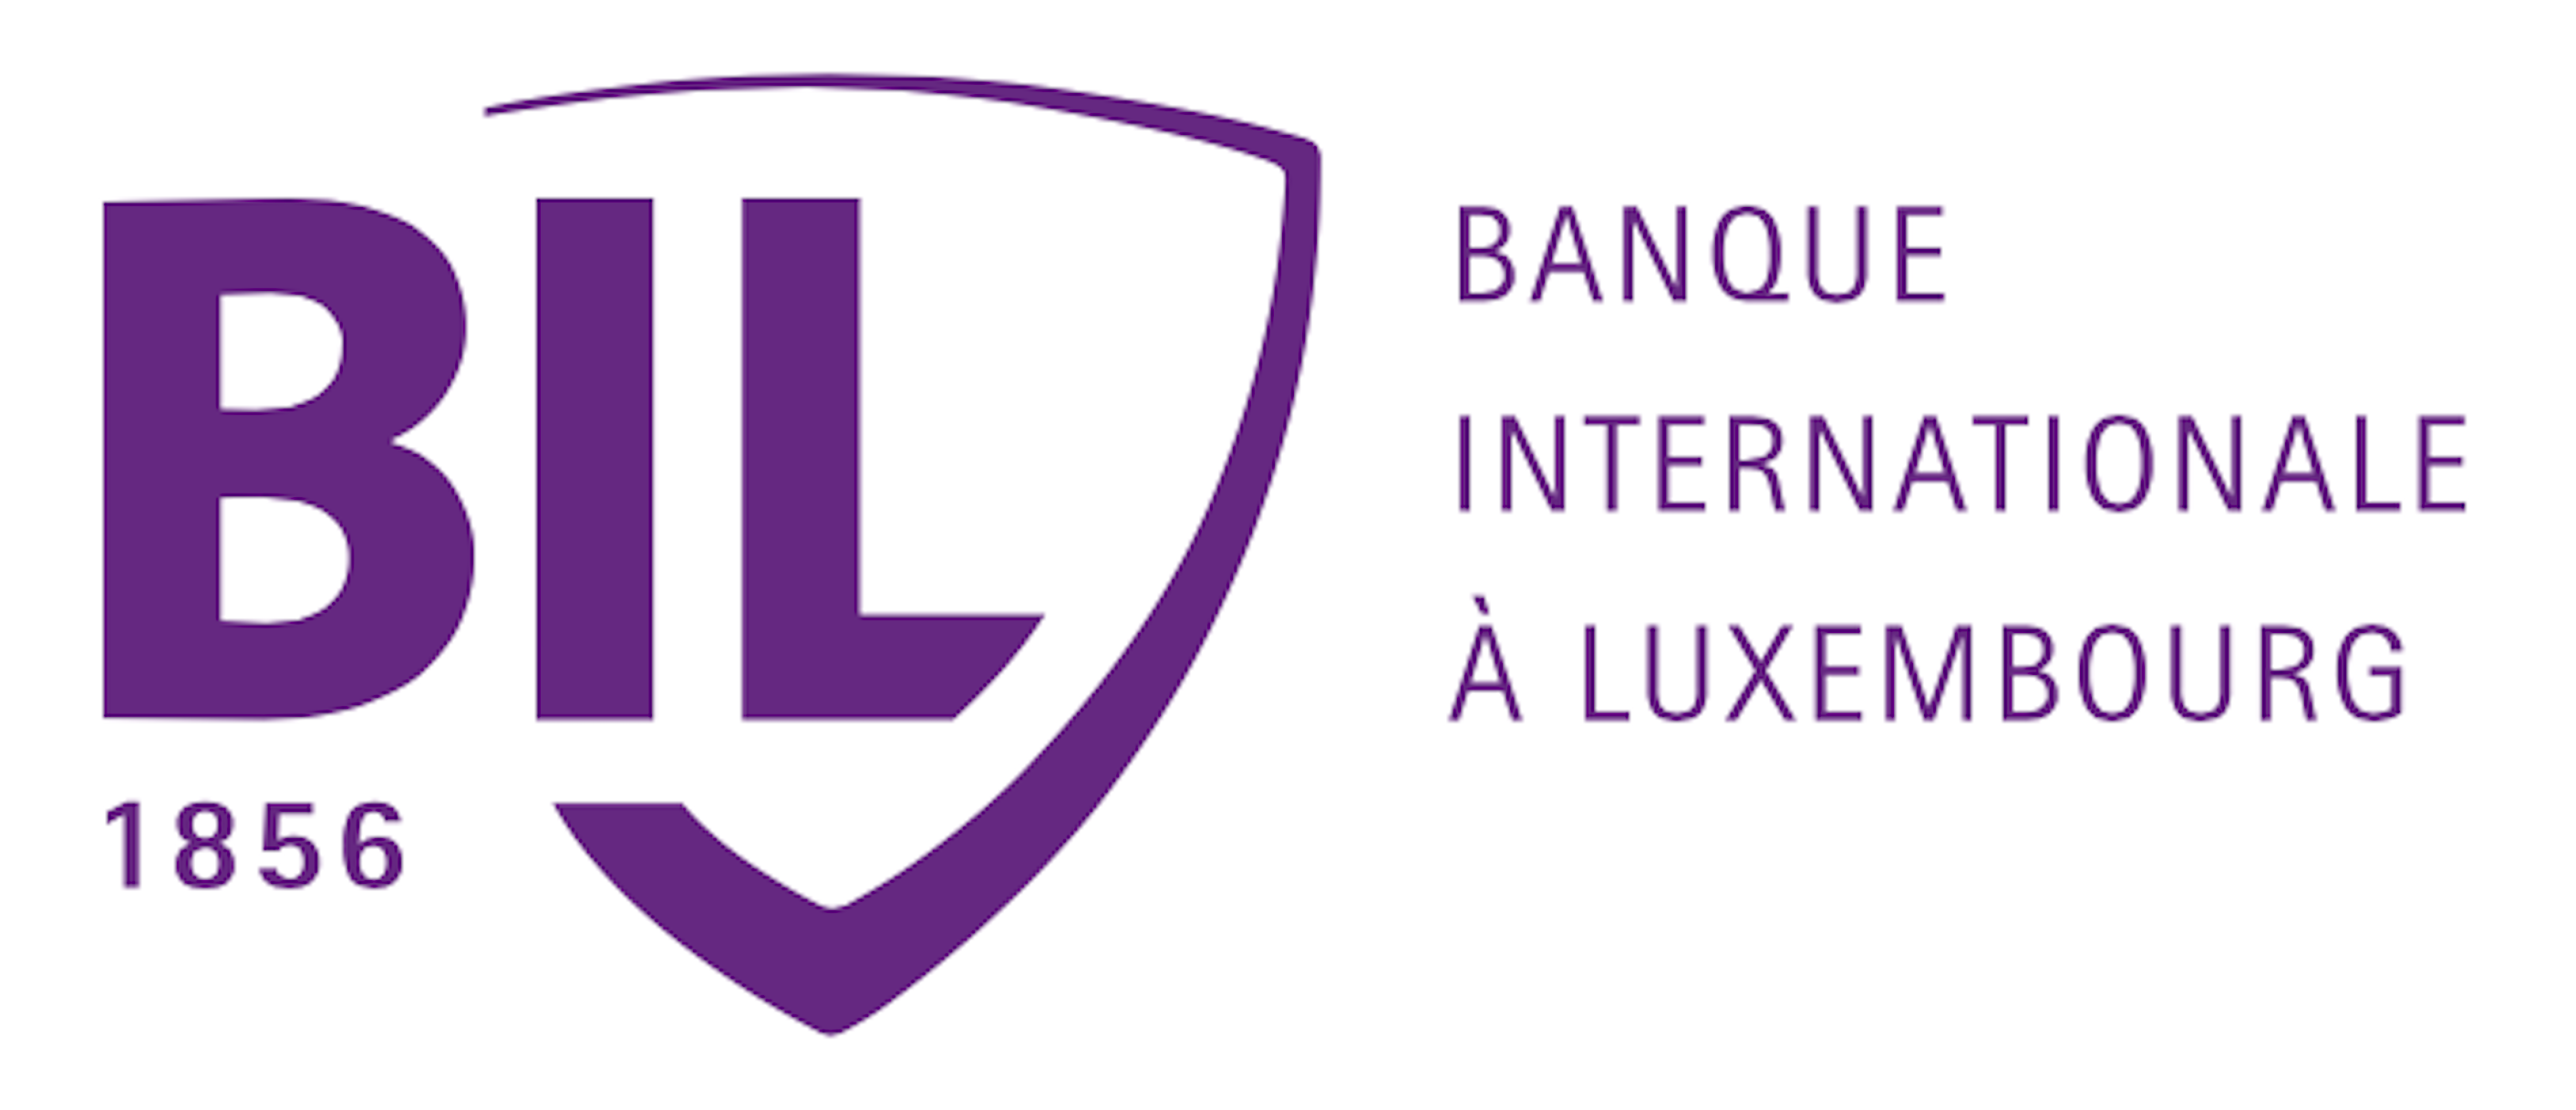 Banque Internationale a Luxembourg Brand Logo